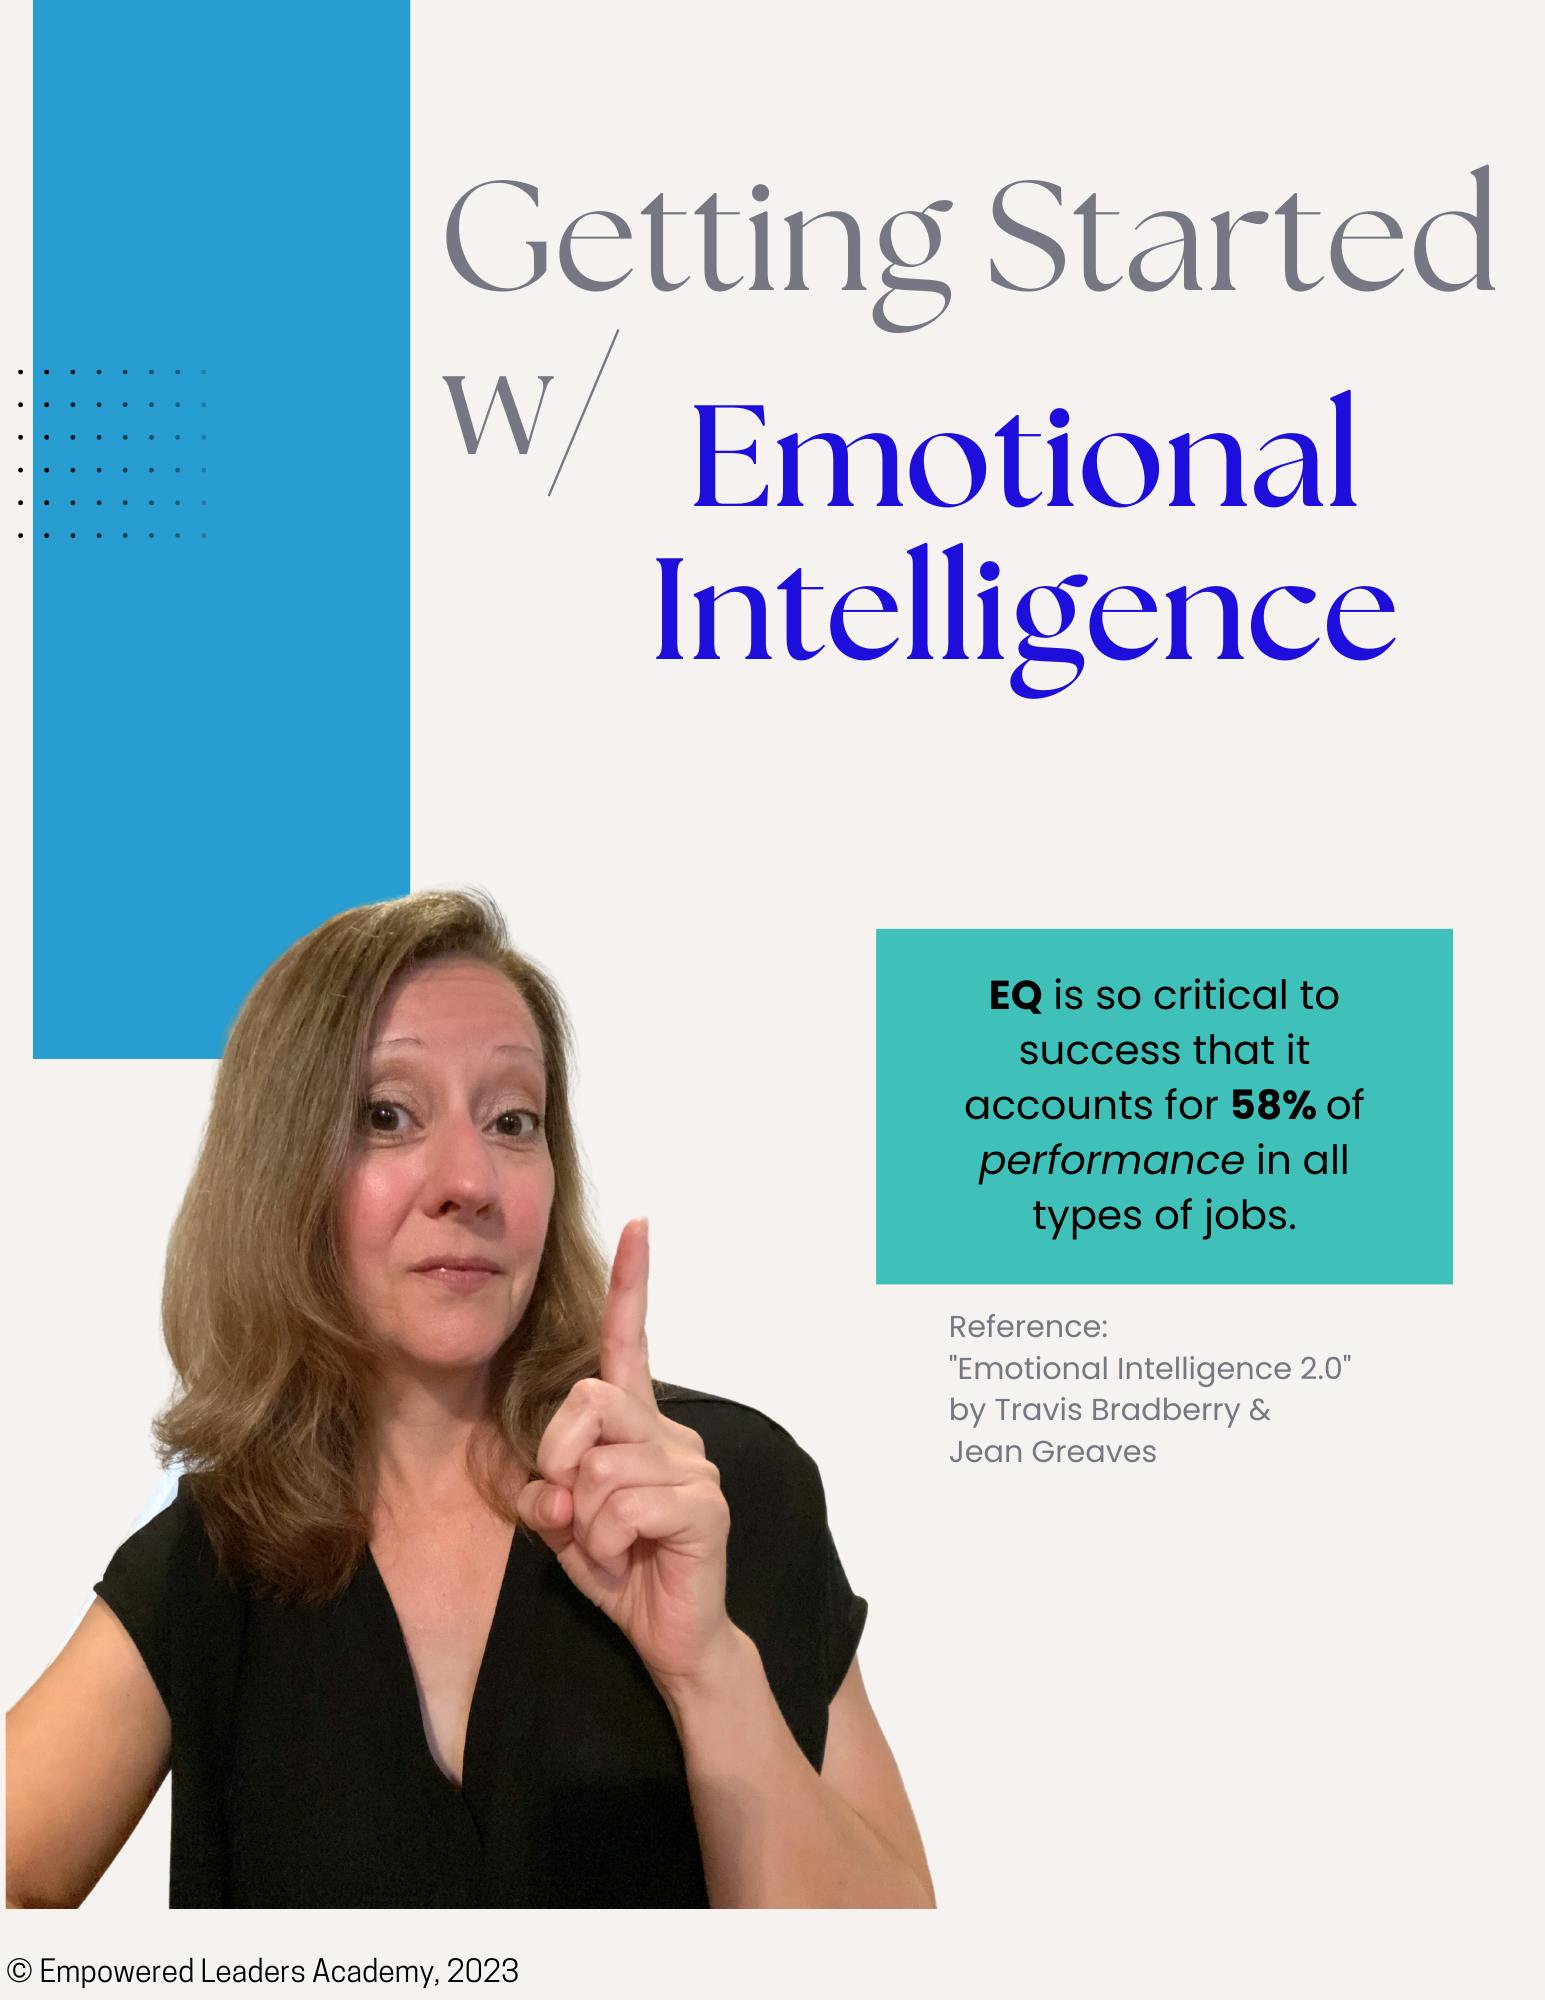 A free PDF download entitled "Getting Started with Emotional Intelligence". The PDF cover features a picture of Stephanie and a quote from the book Emotional Intelligence 2.0 that says "EQ is so critical to success that it accounts for 58% of performance in all types of jobs."